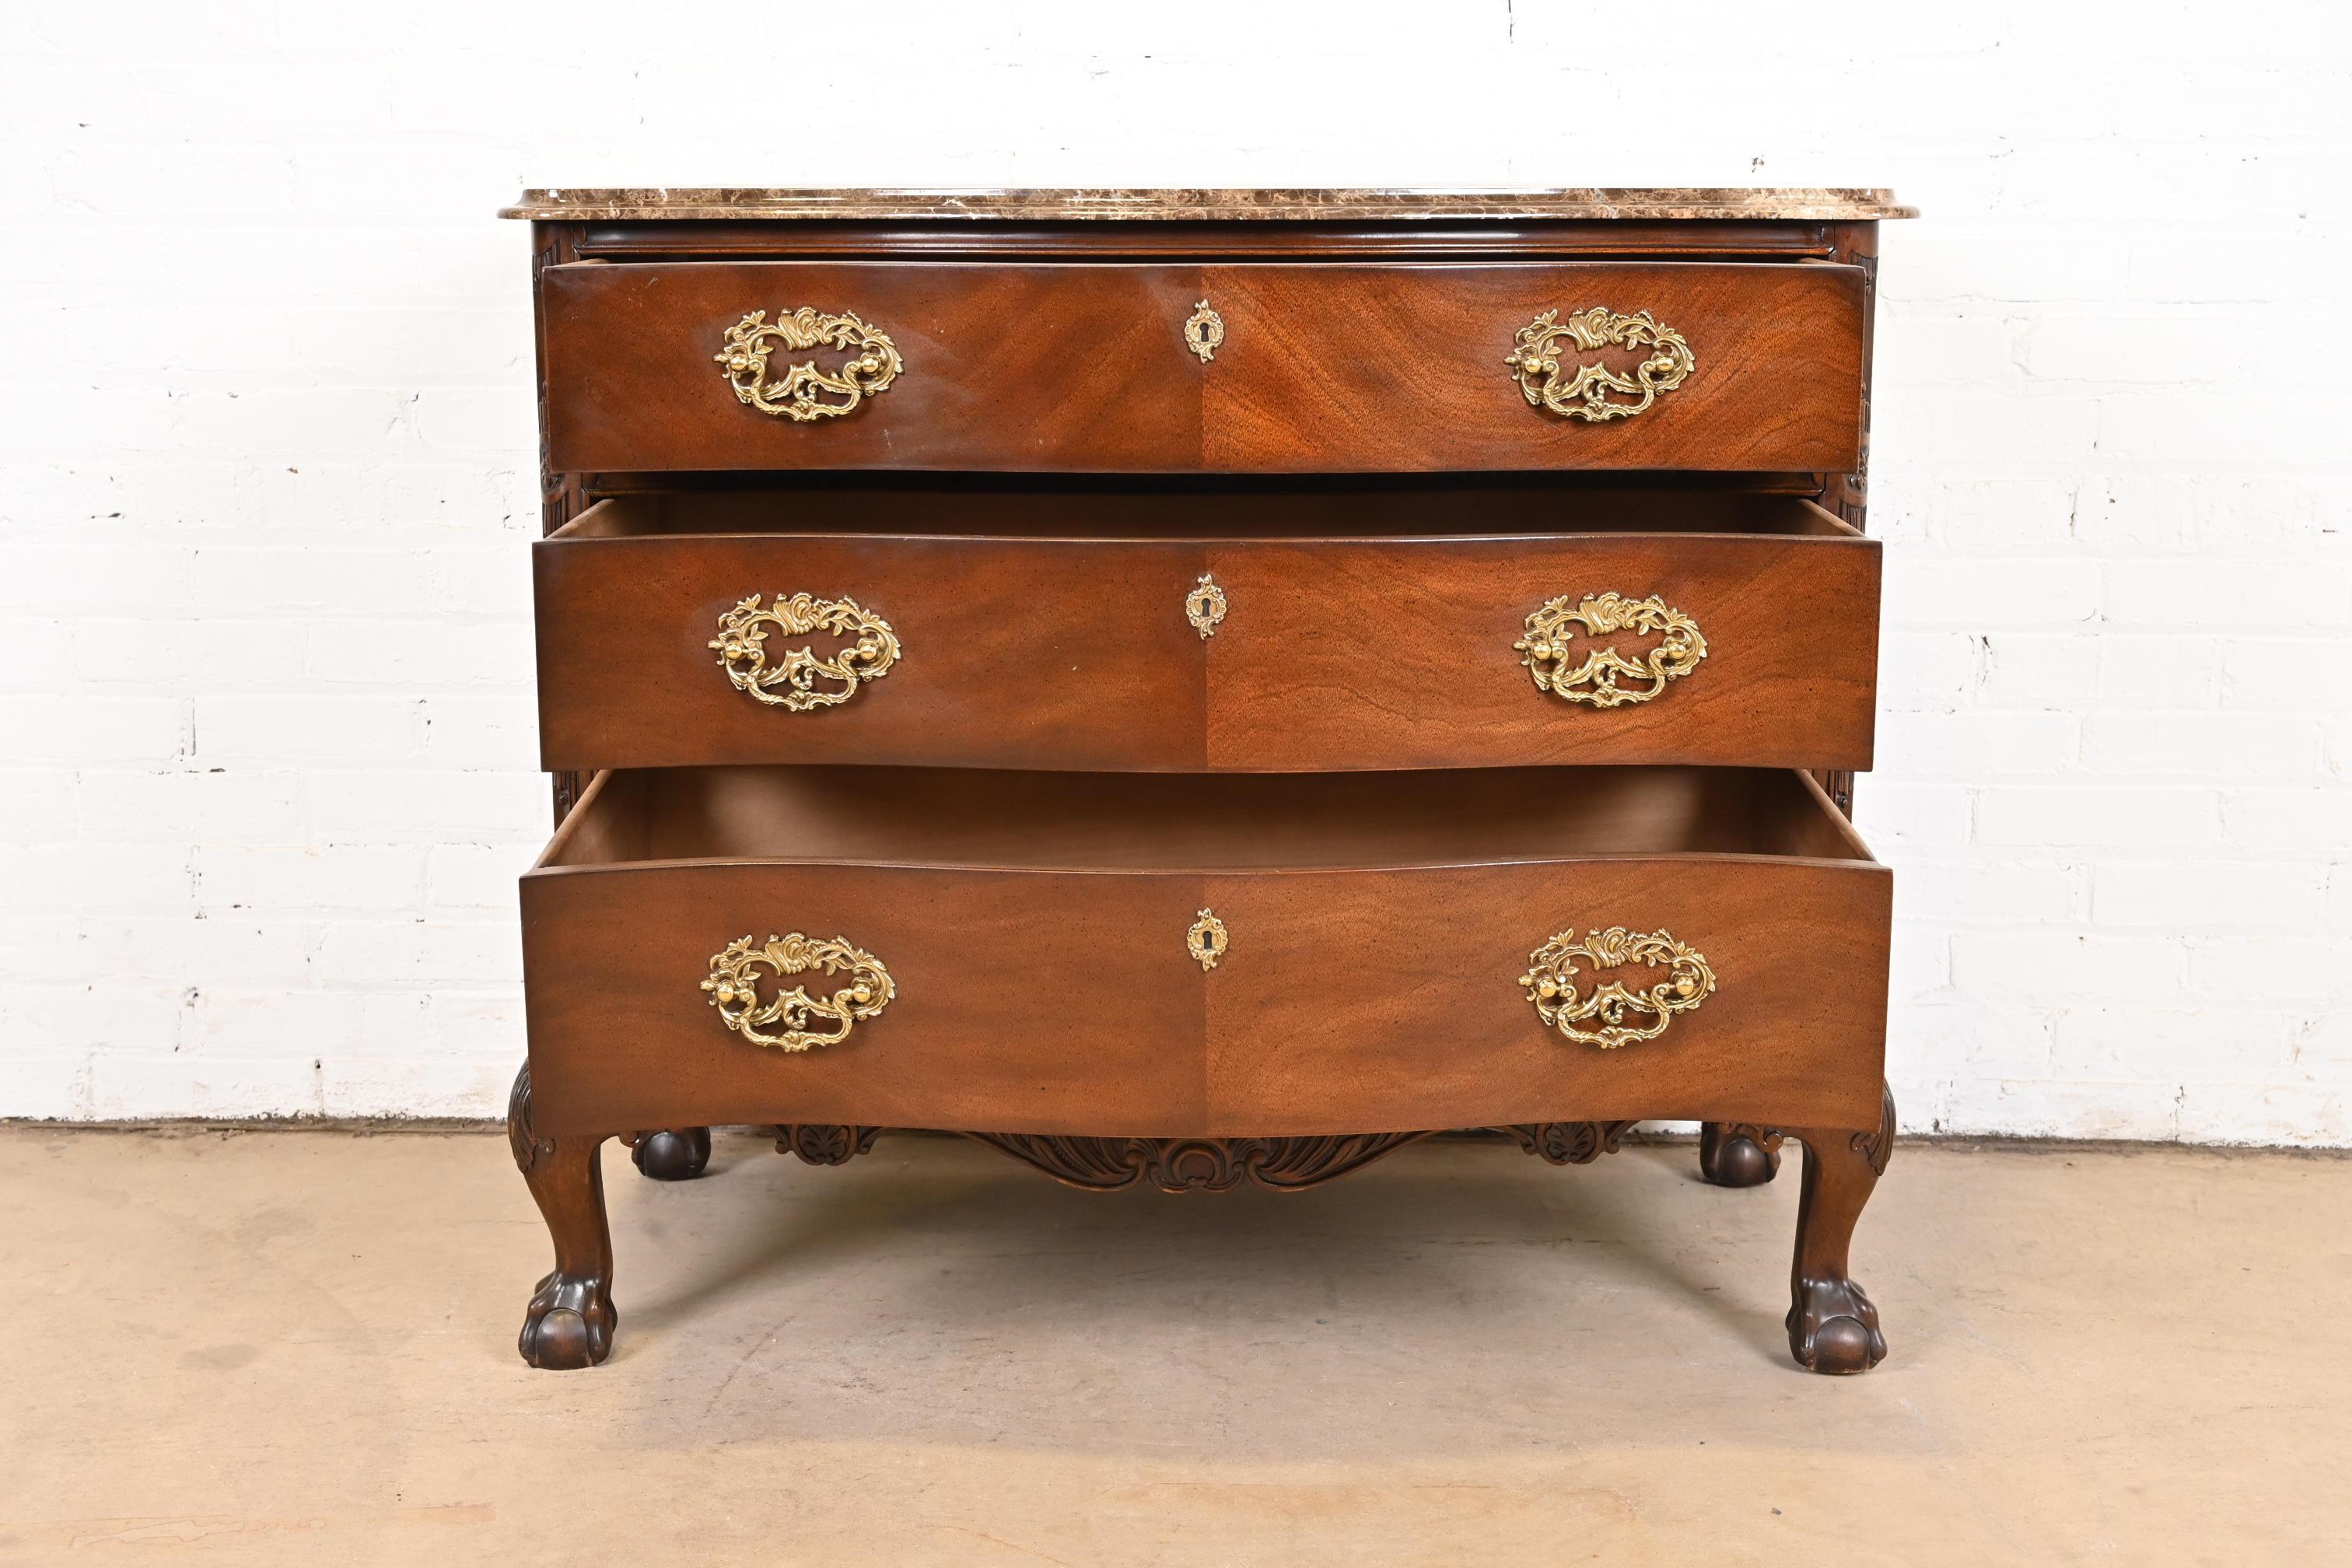 Henredon Chippendale Carved Mahogany Marble Top Serpentine Chest of Drawers For Sale 3